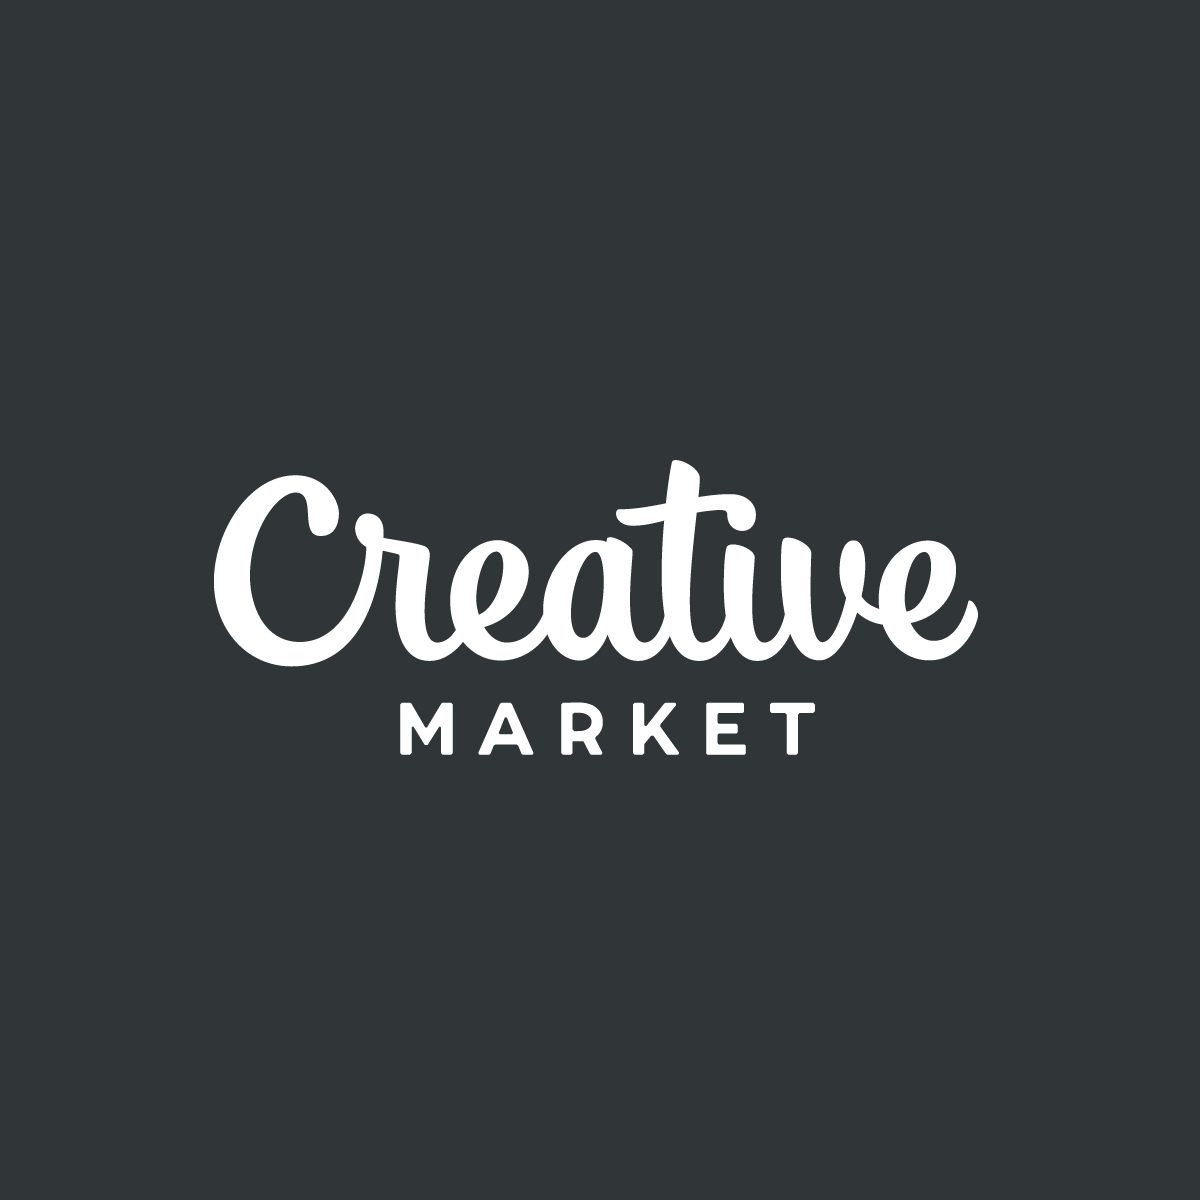 Download Free Fonts Graphics Themes And More Creative Market PSD Mockups.